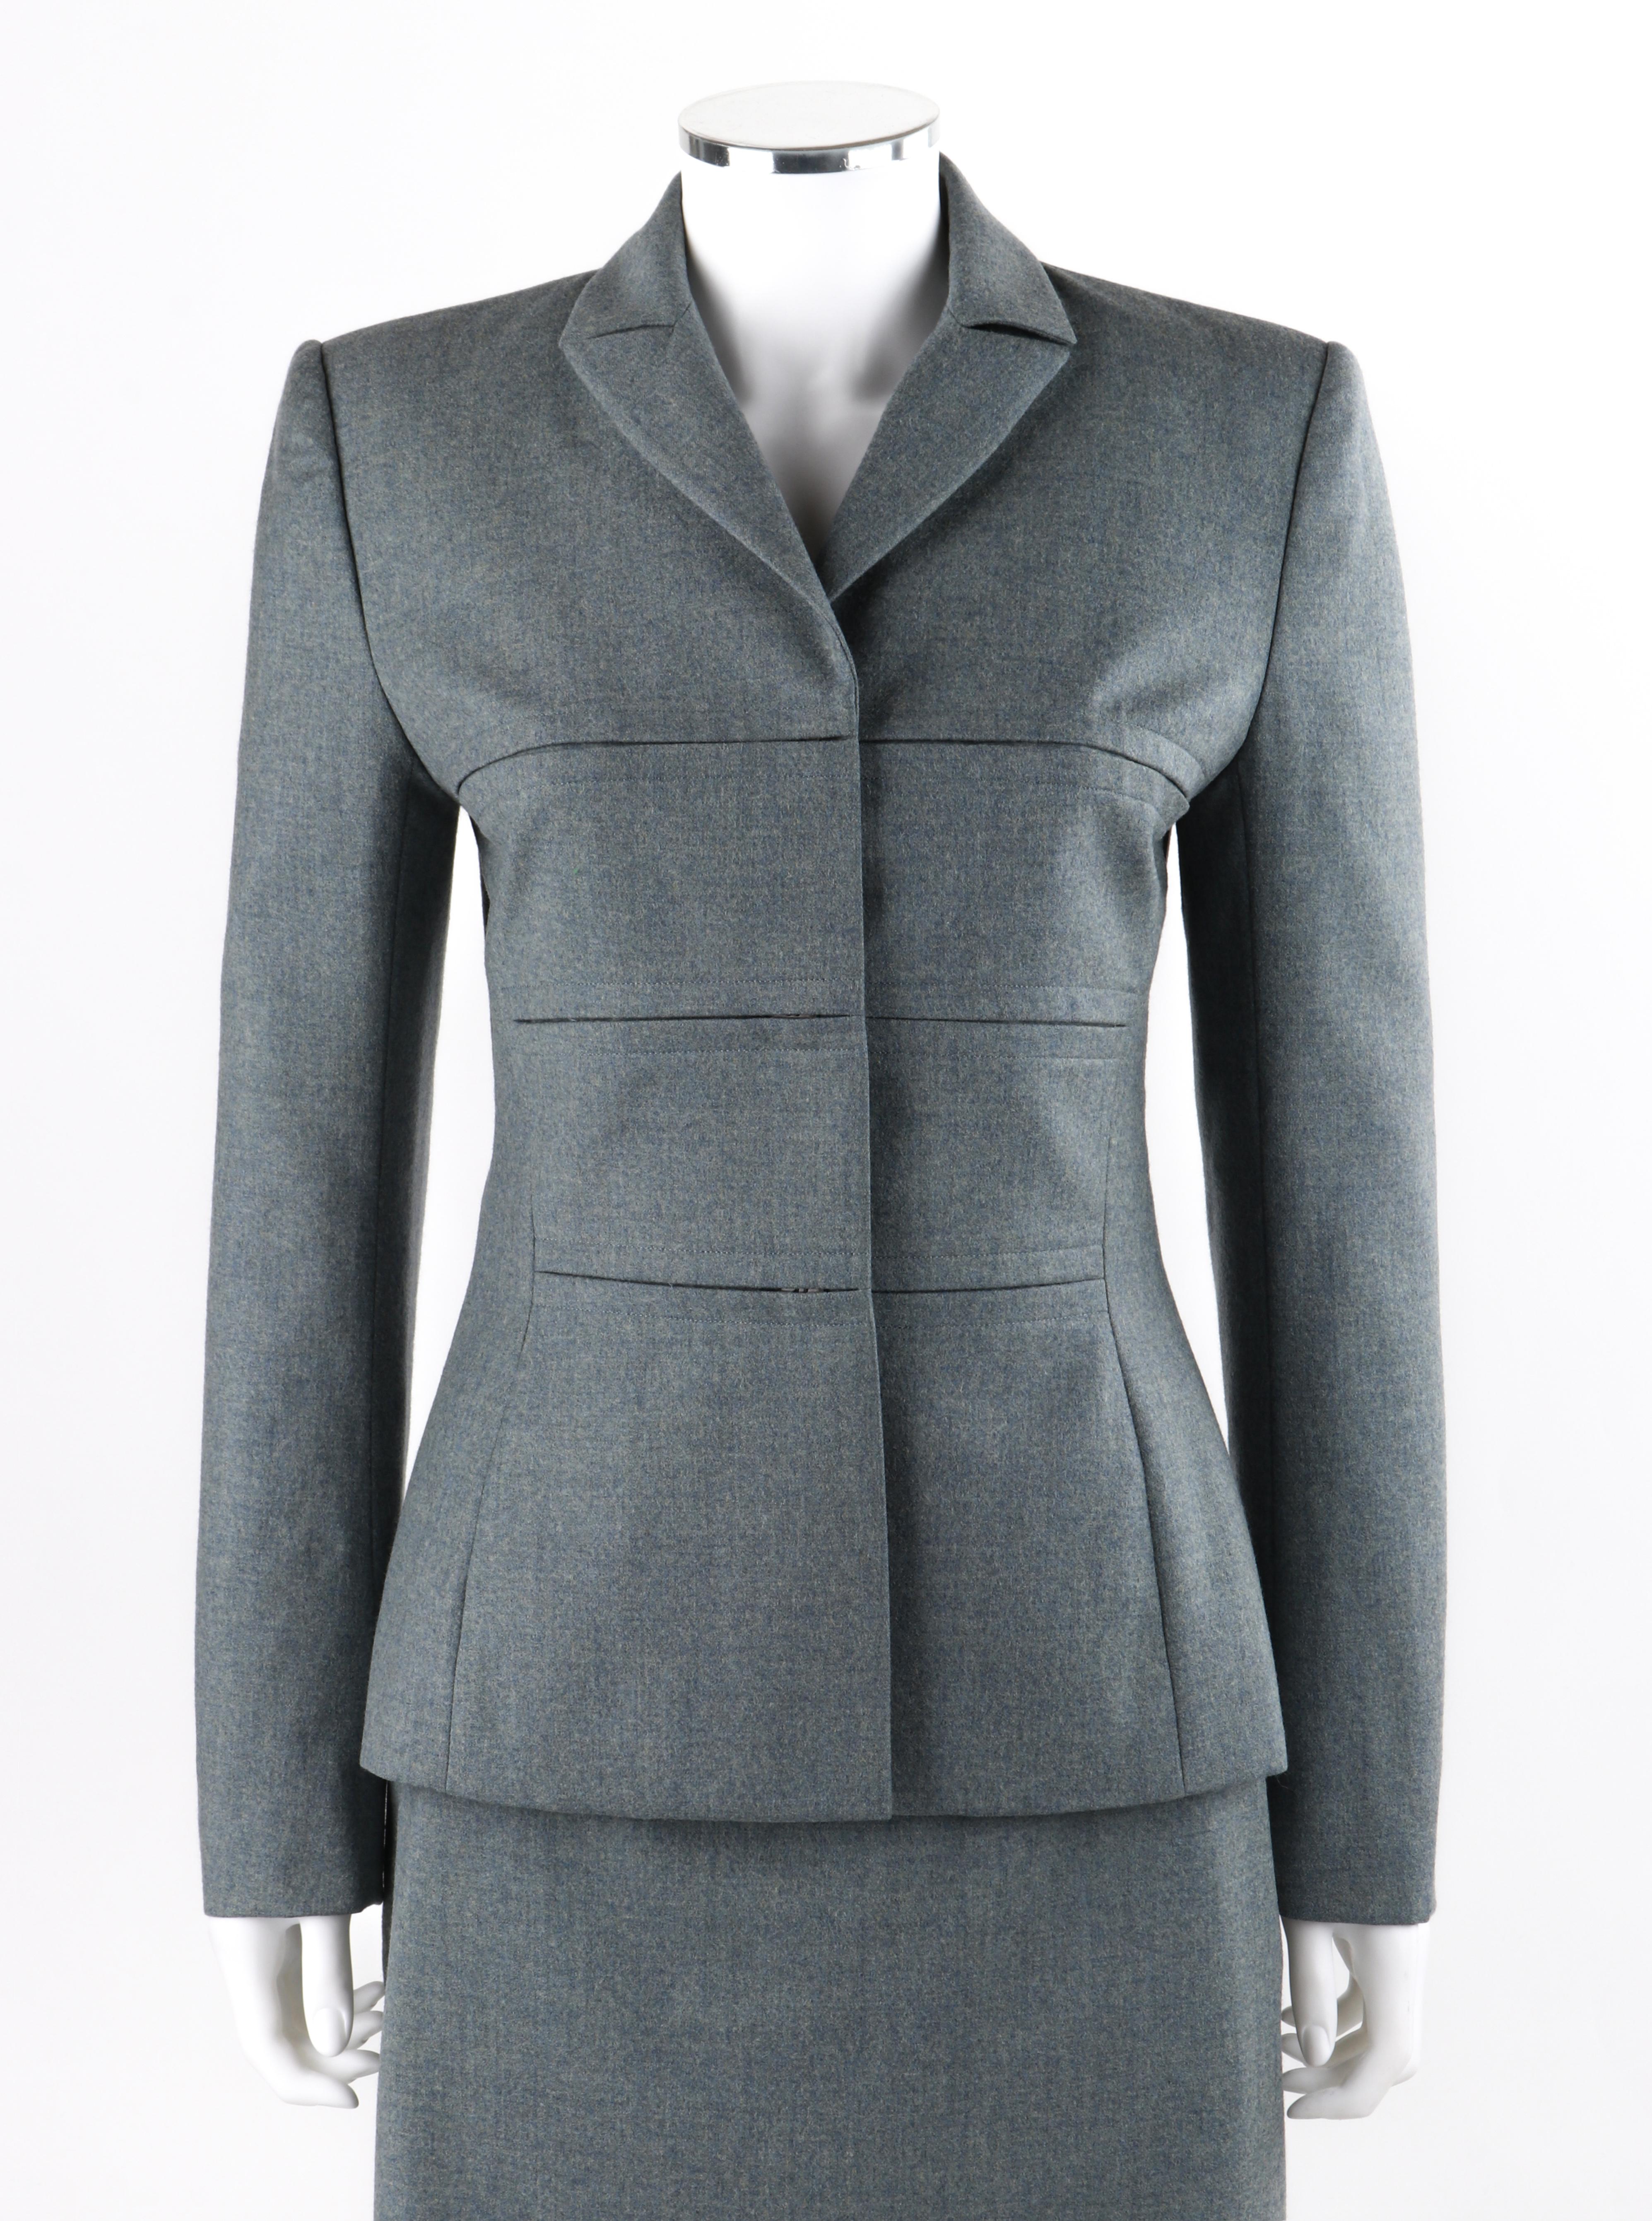 GIVENCHY Couture A/W 1998 ALEXANDER McQUEEN Blue Gray Tailored Blazer Skirt Suit
 
Brand / Manufacturer: Givenchy
Collection: A/W 1998
Designer: Alexander McQueen
Style: Tailored blazer jacket; tailored sheath skirt
Color(s): Shades of